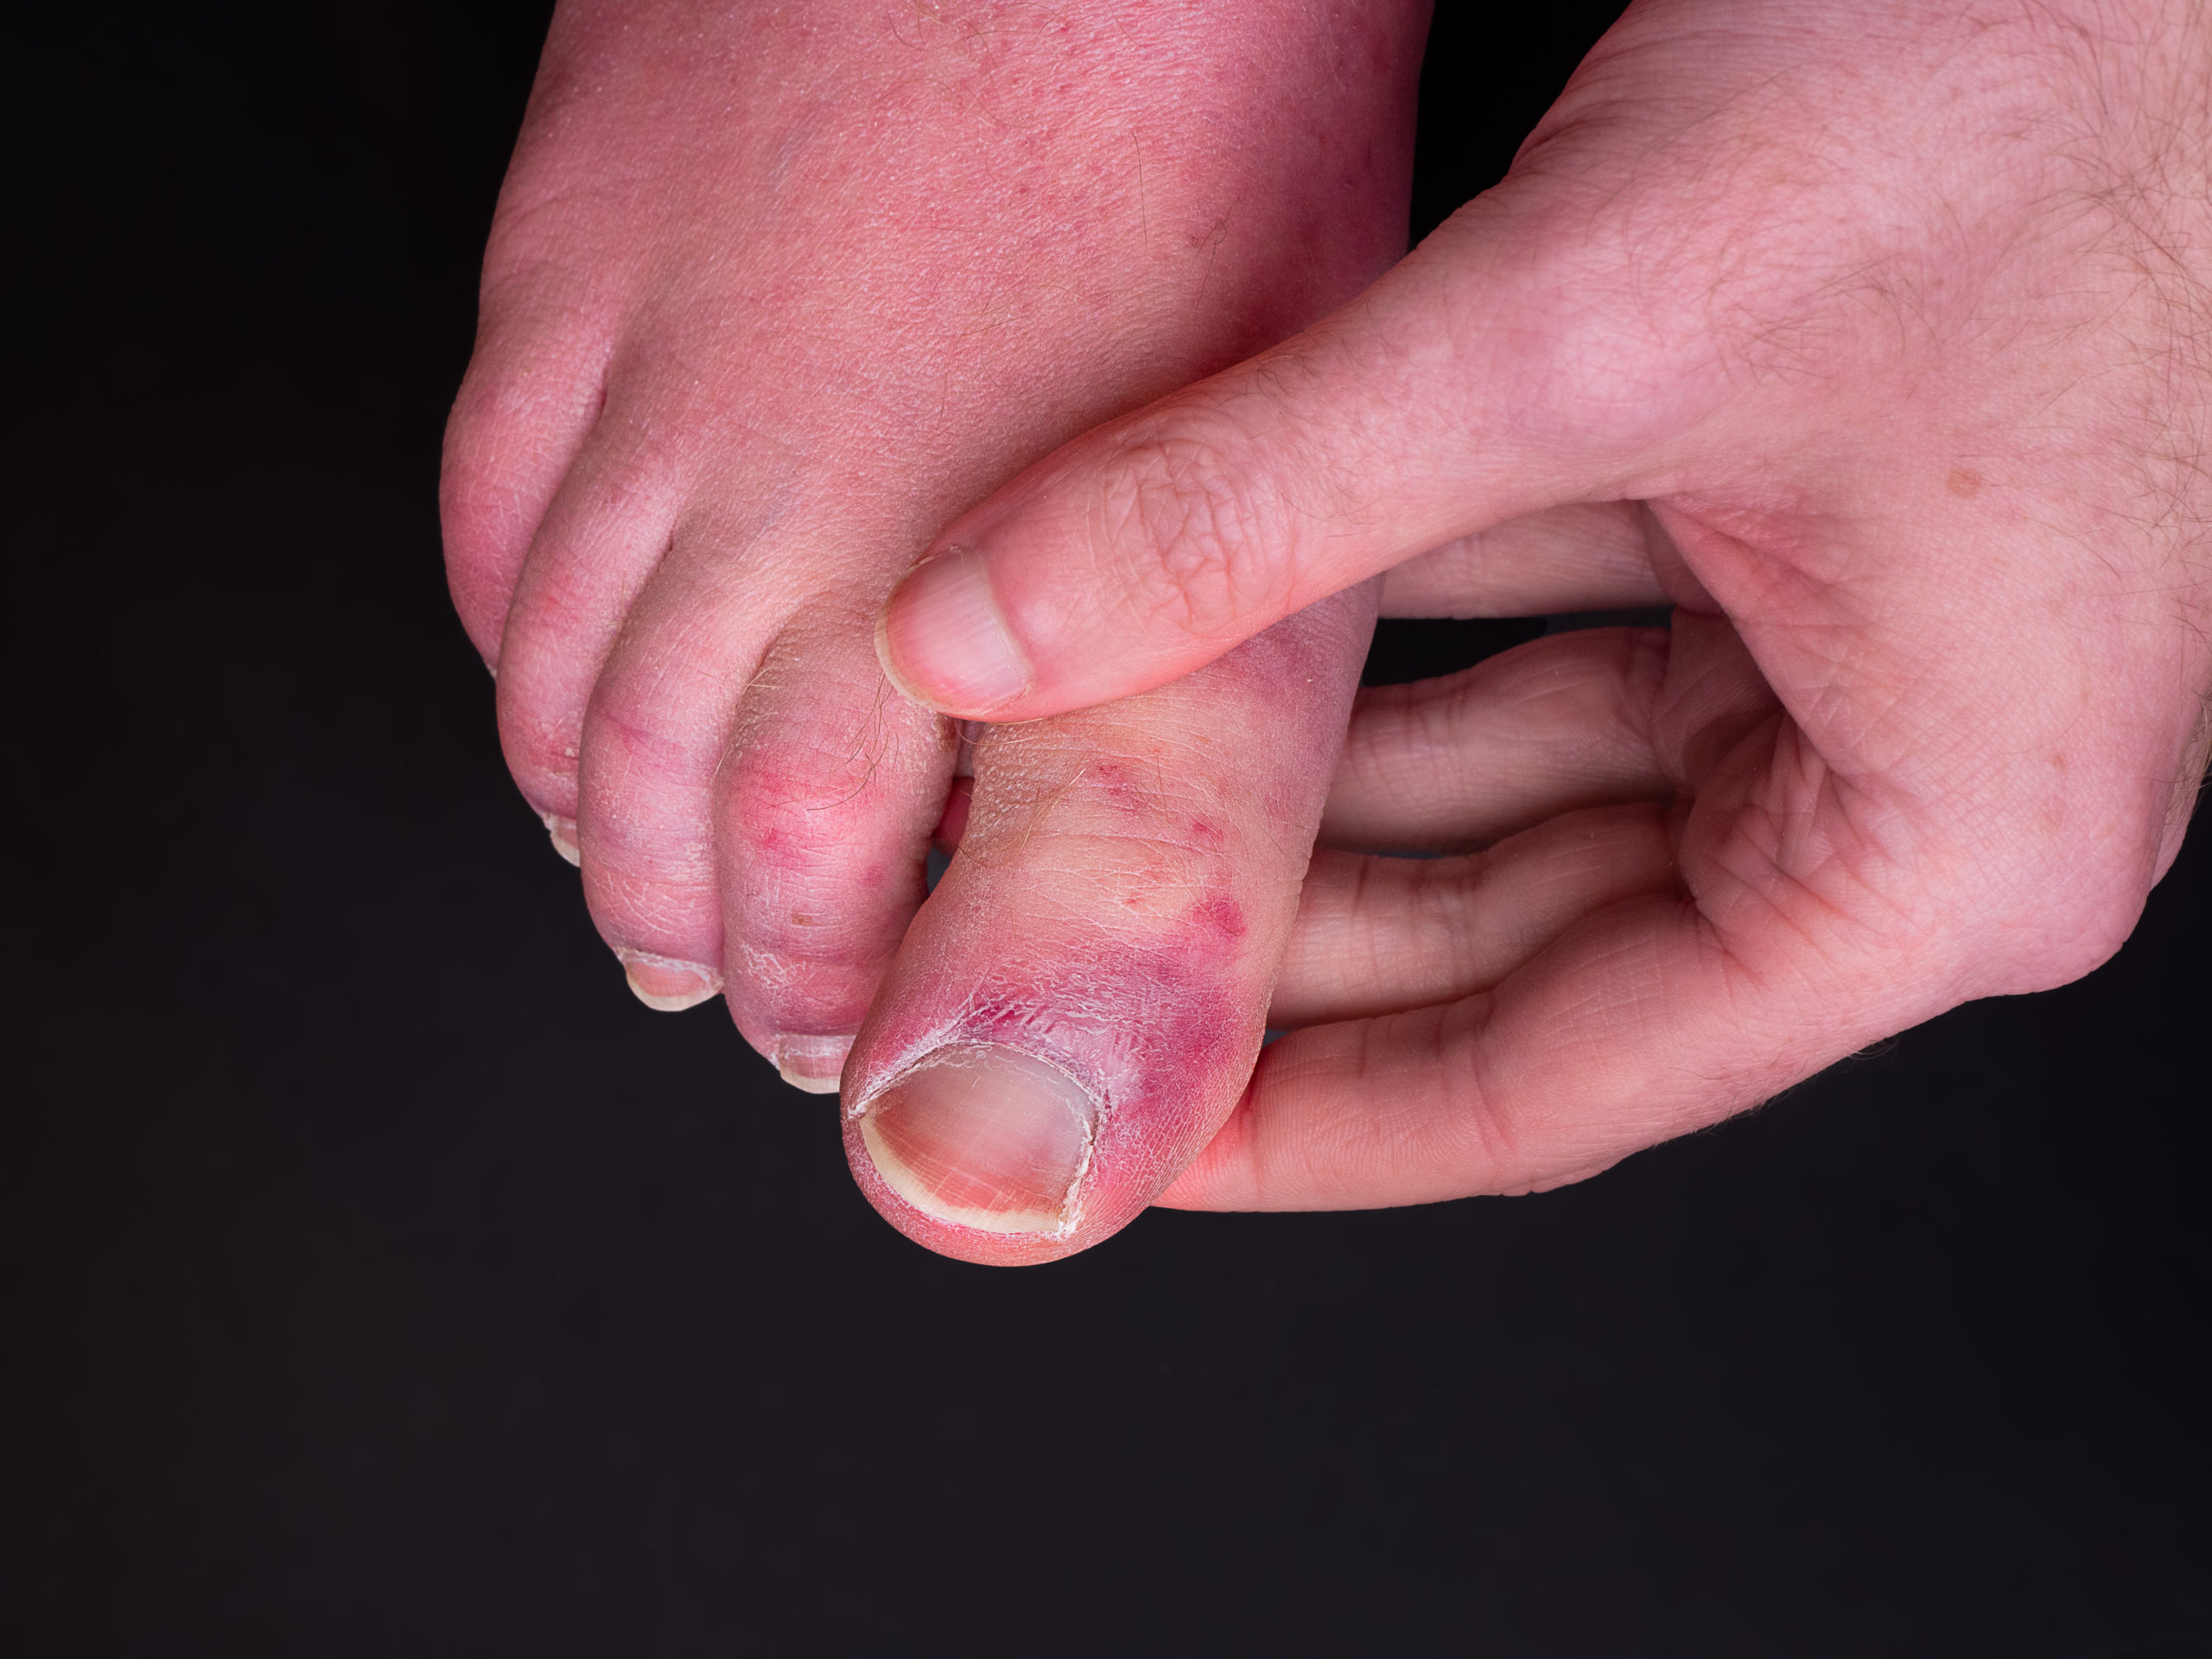 What causes red spots on the feet? Other symptoms and treatment